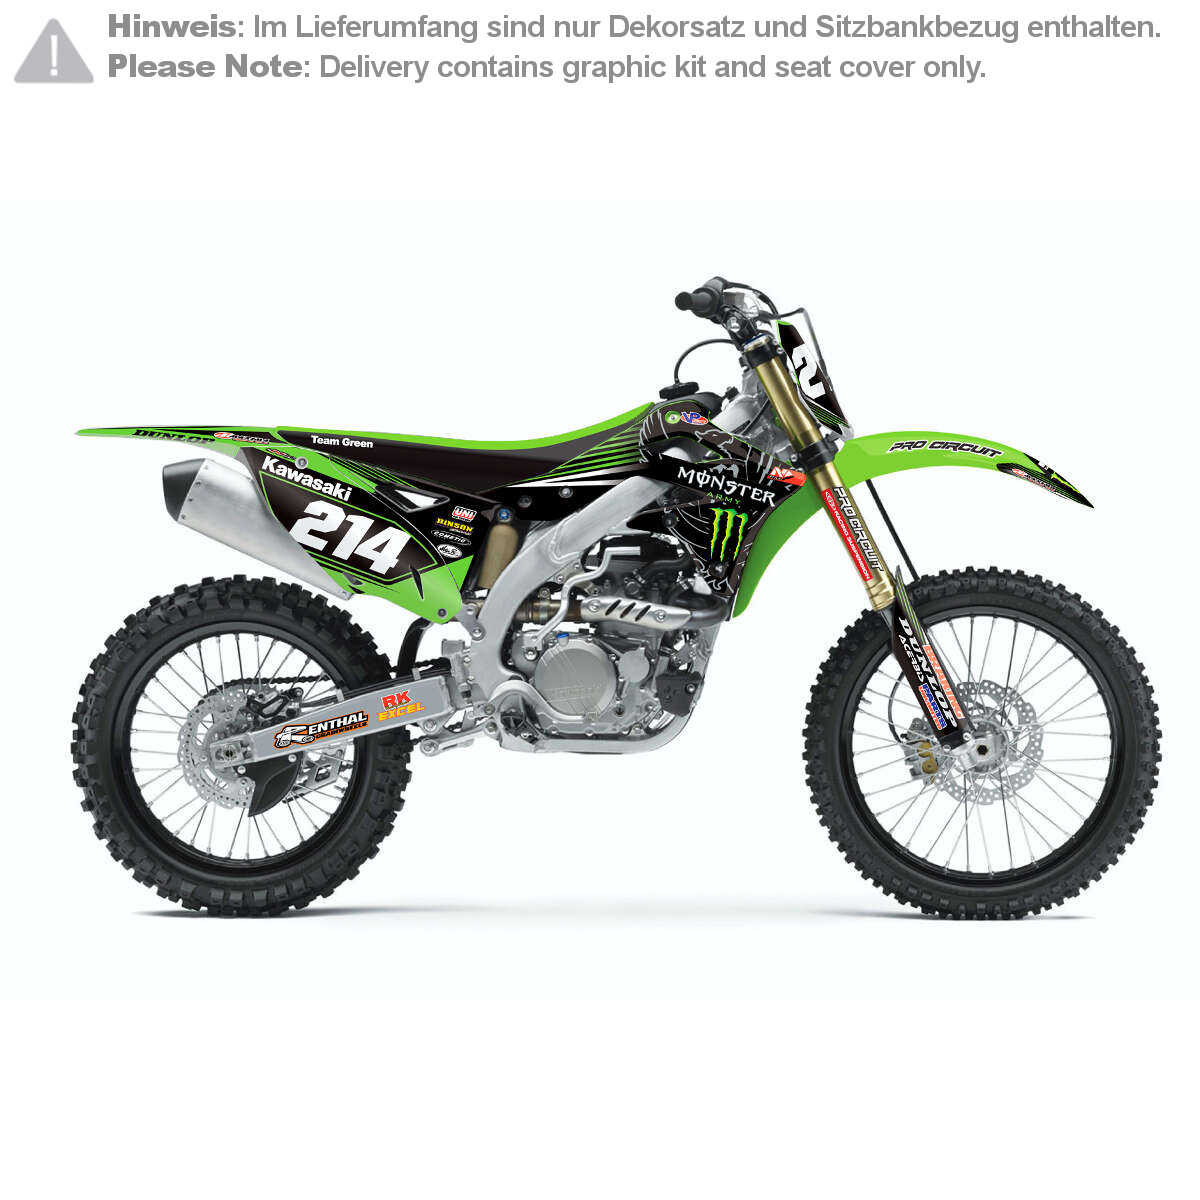 N-Style Graphic Kit with Seat Cover Monster Energy/Team Green Kawasaki KX 125/250 03-08, Green/Black